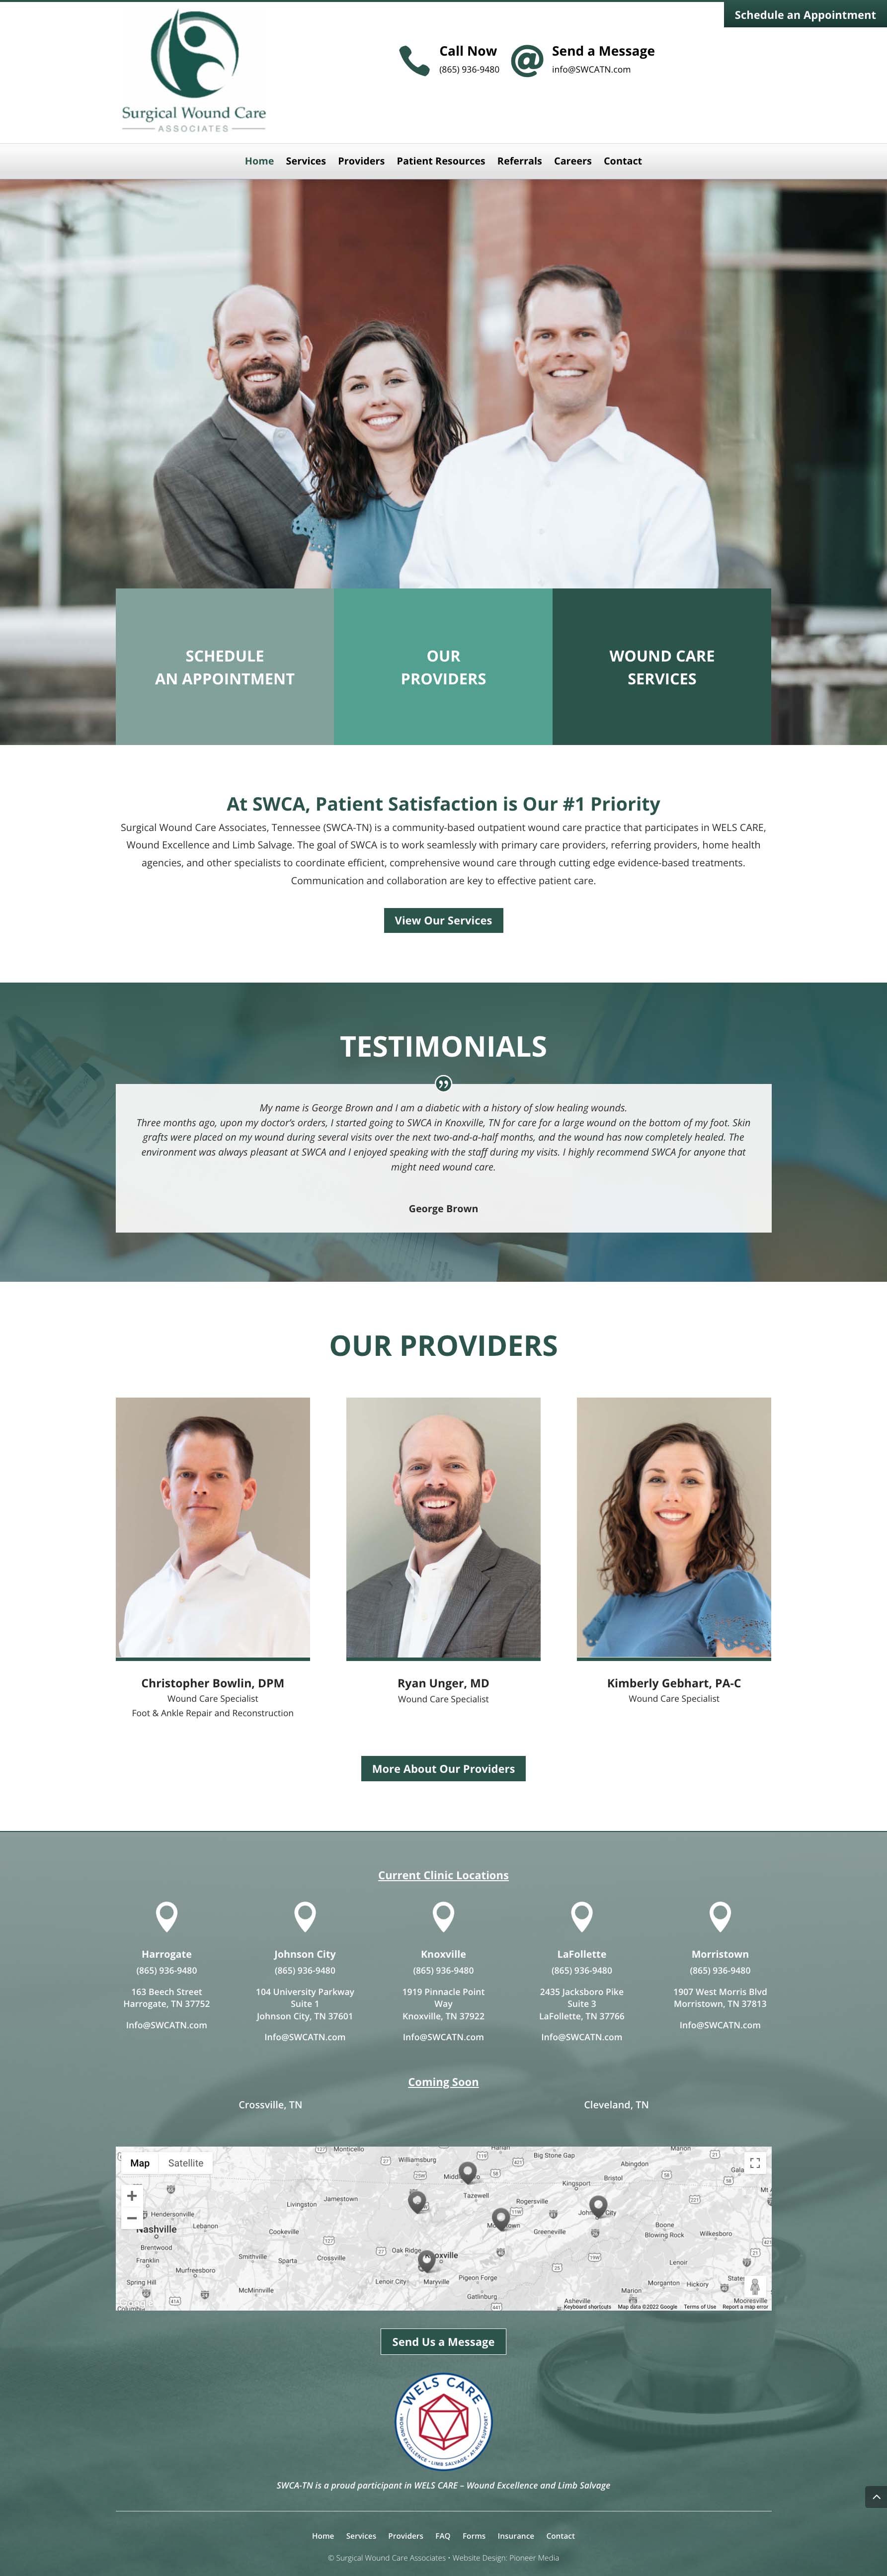 Surgical Wound Care Associates Website Homepage